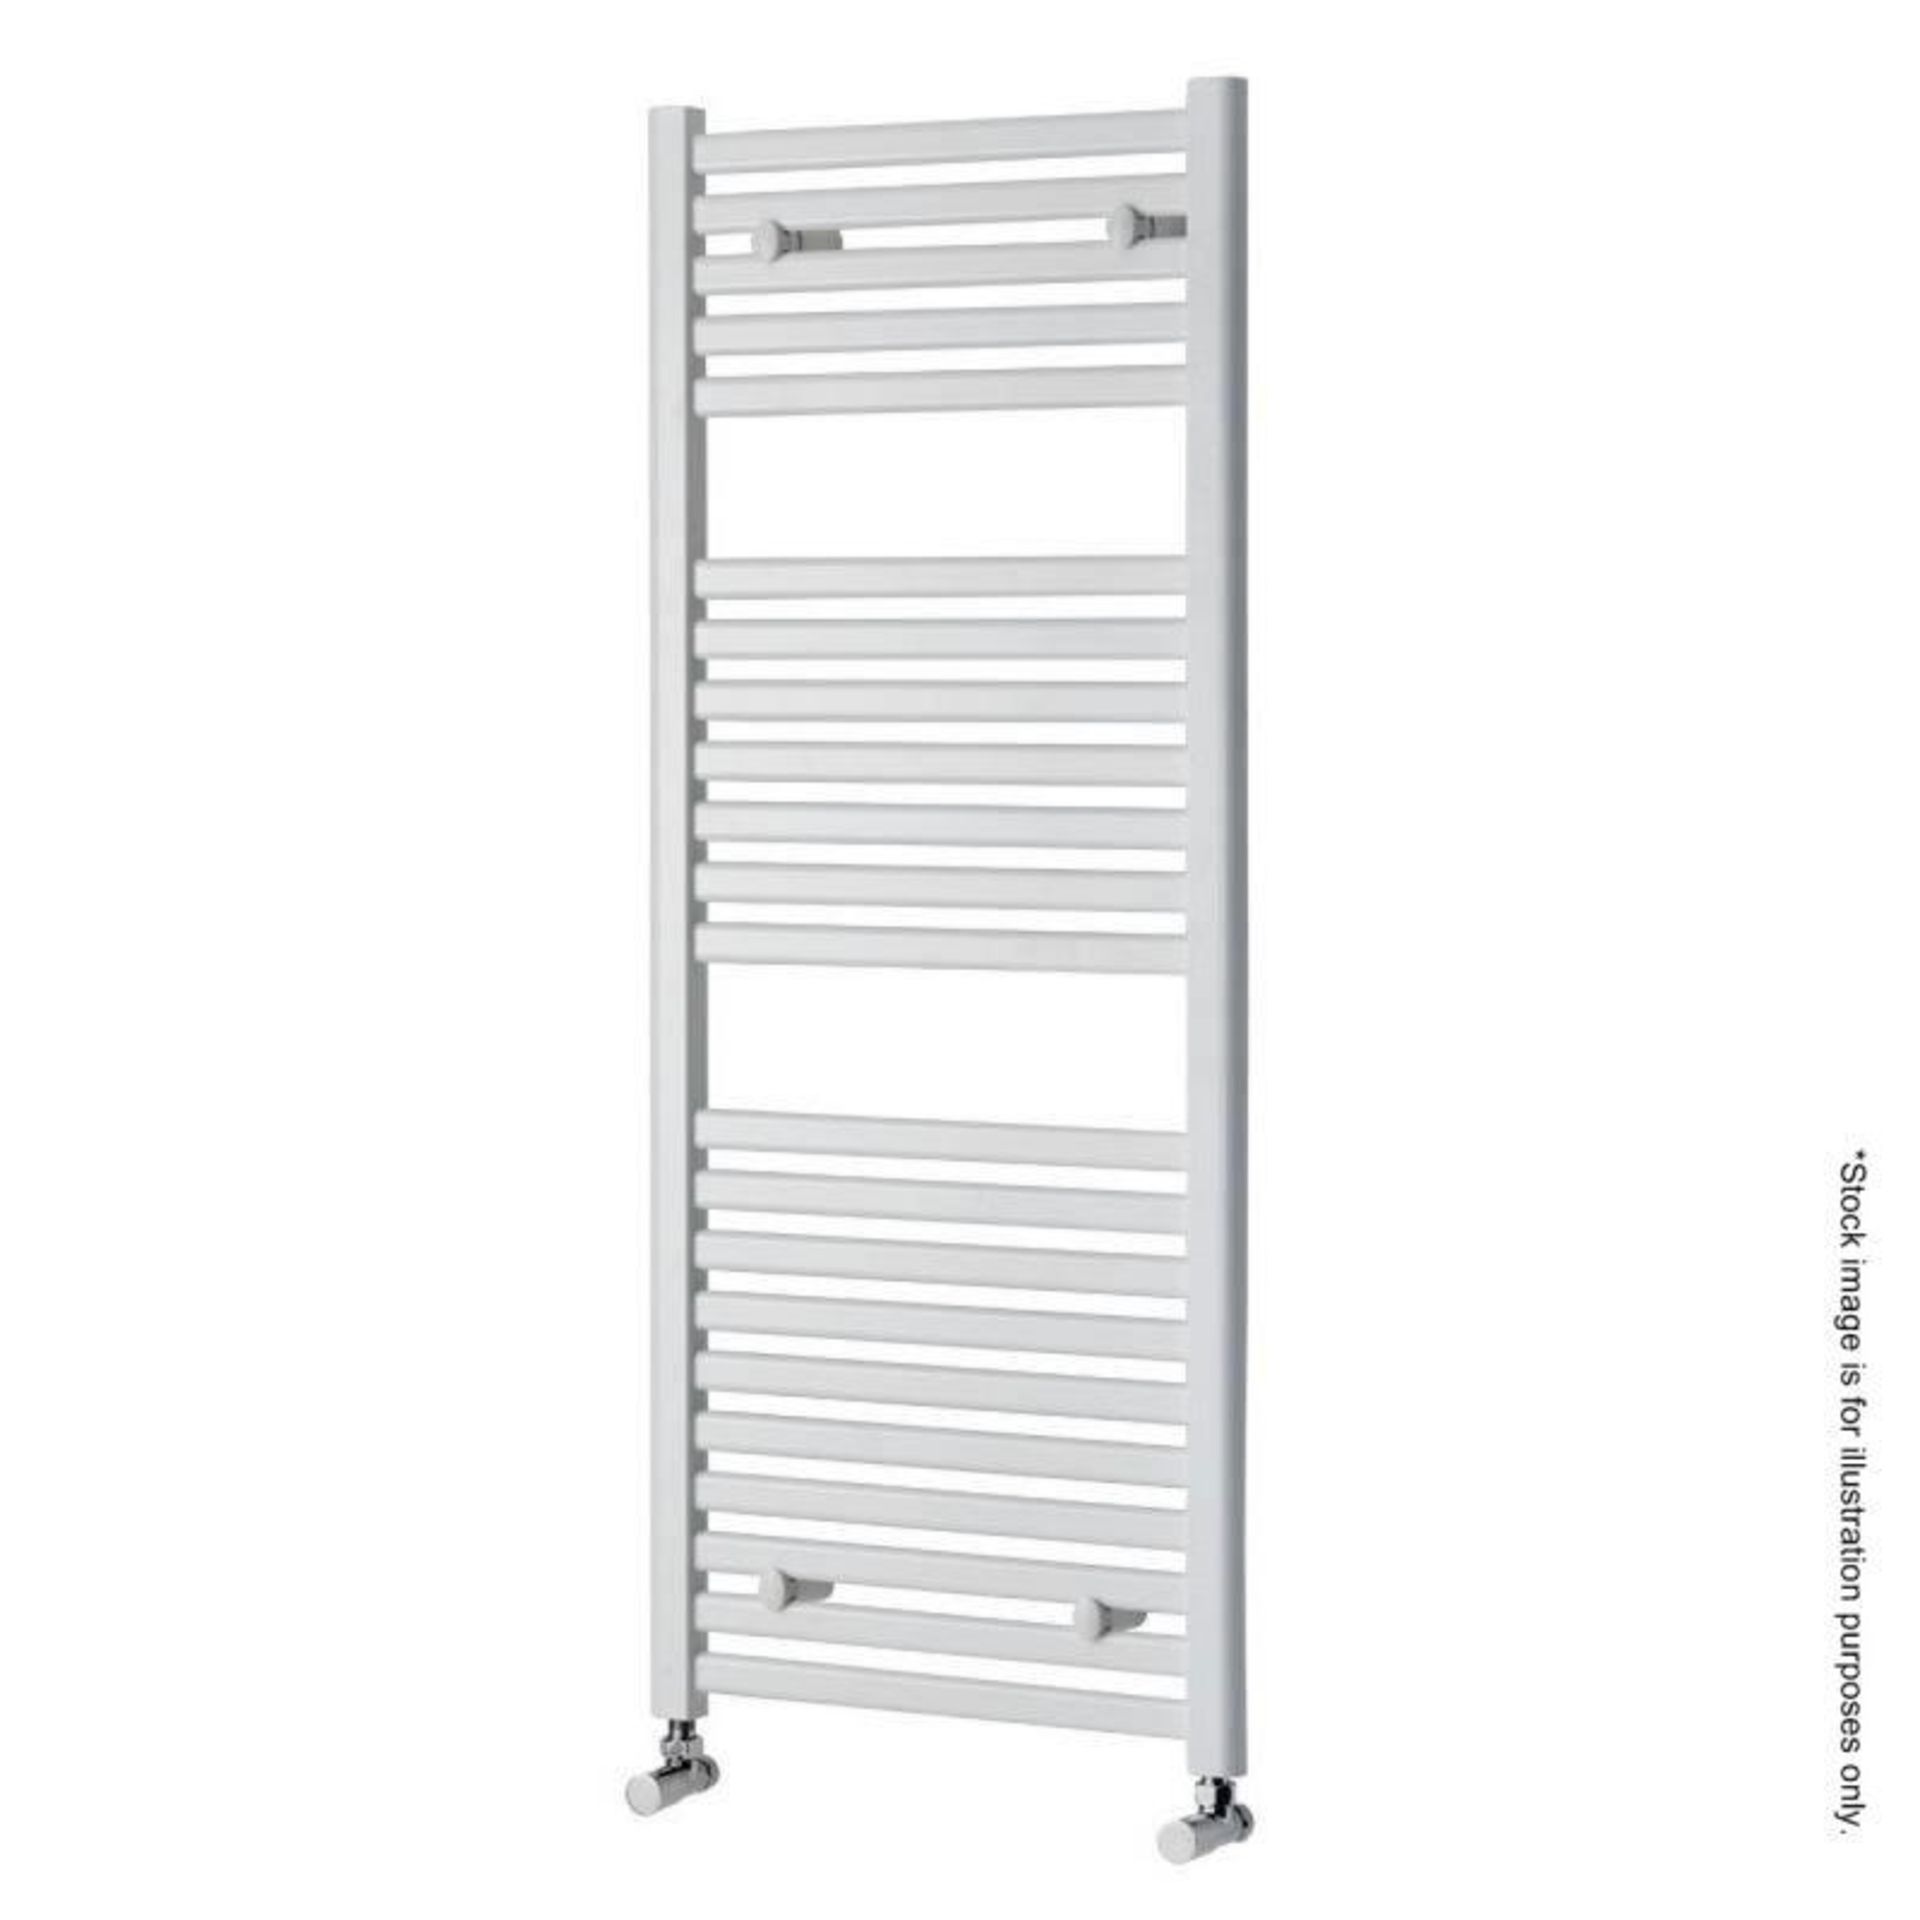 1 x OVAL Heated Towel Rail Radiator In White (TW27) - Unused Boxed Stock - Size: 1200 x 500mm - CL19 - Image 4 of 10